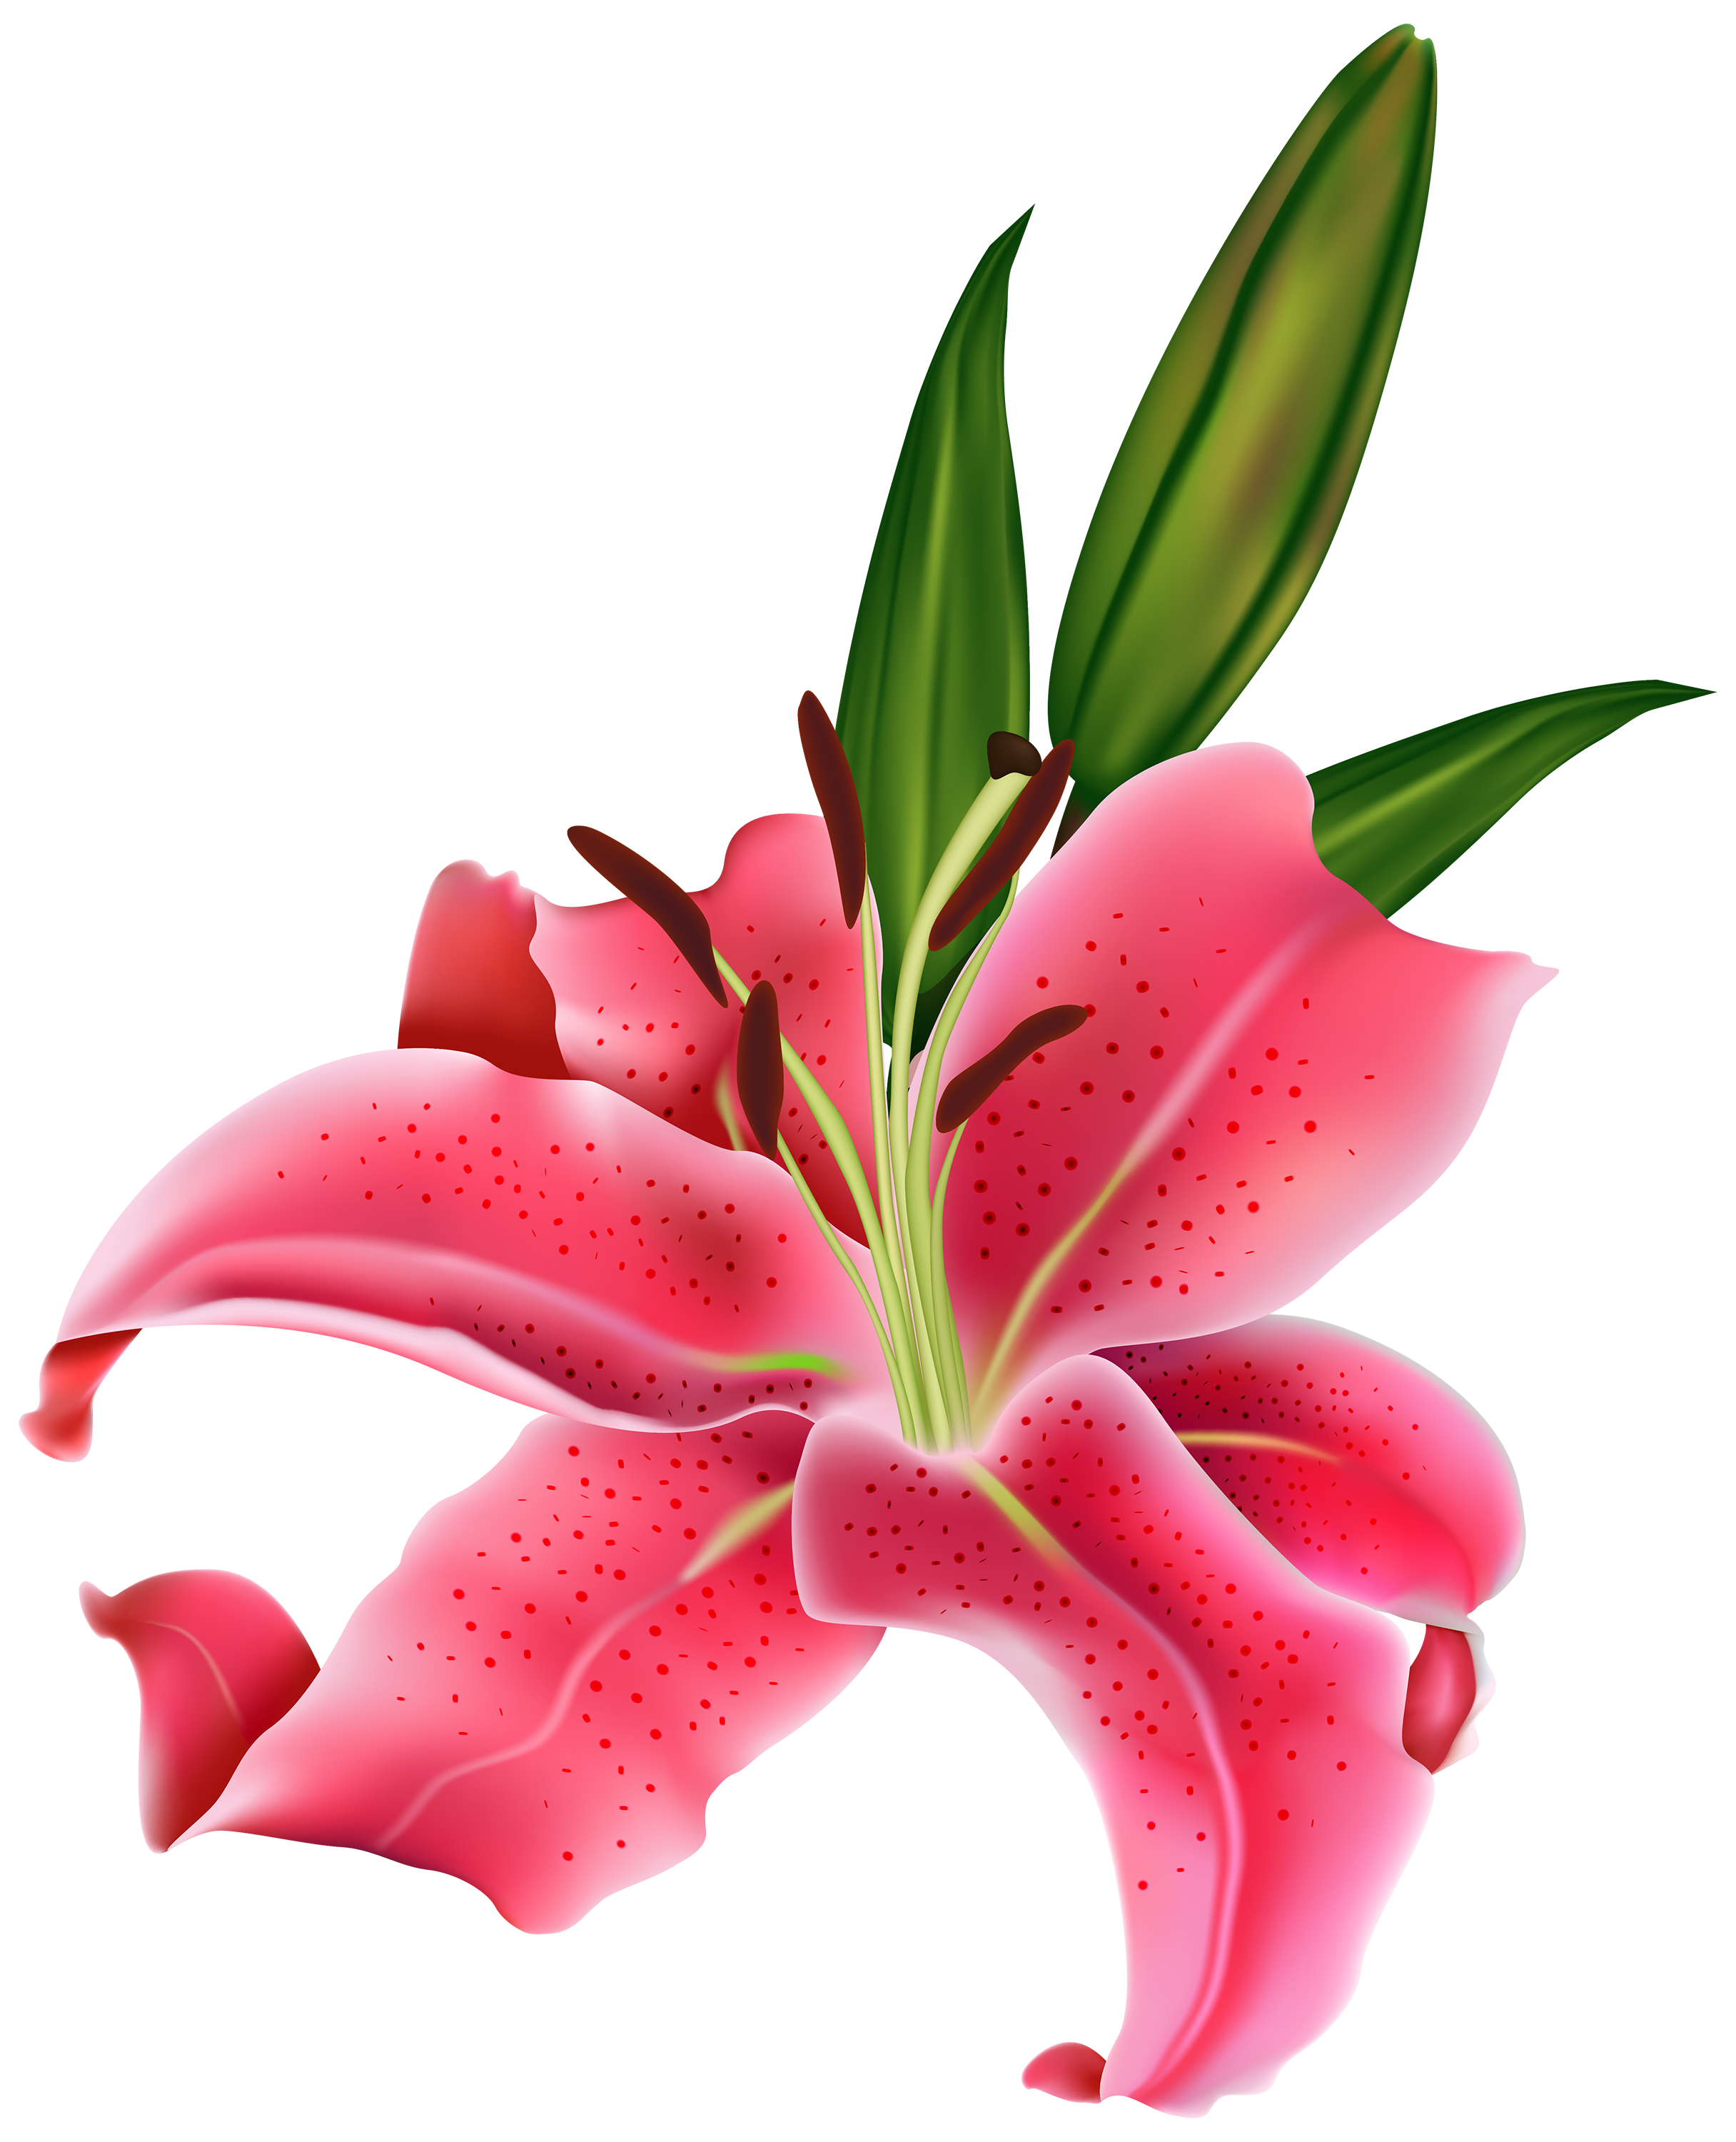 Lily at getdrawings com. Clipart bow flower